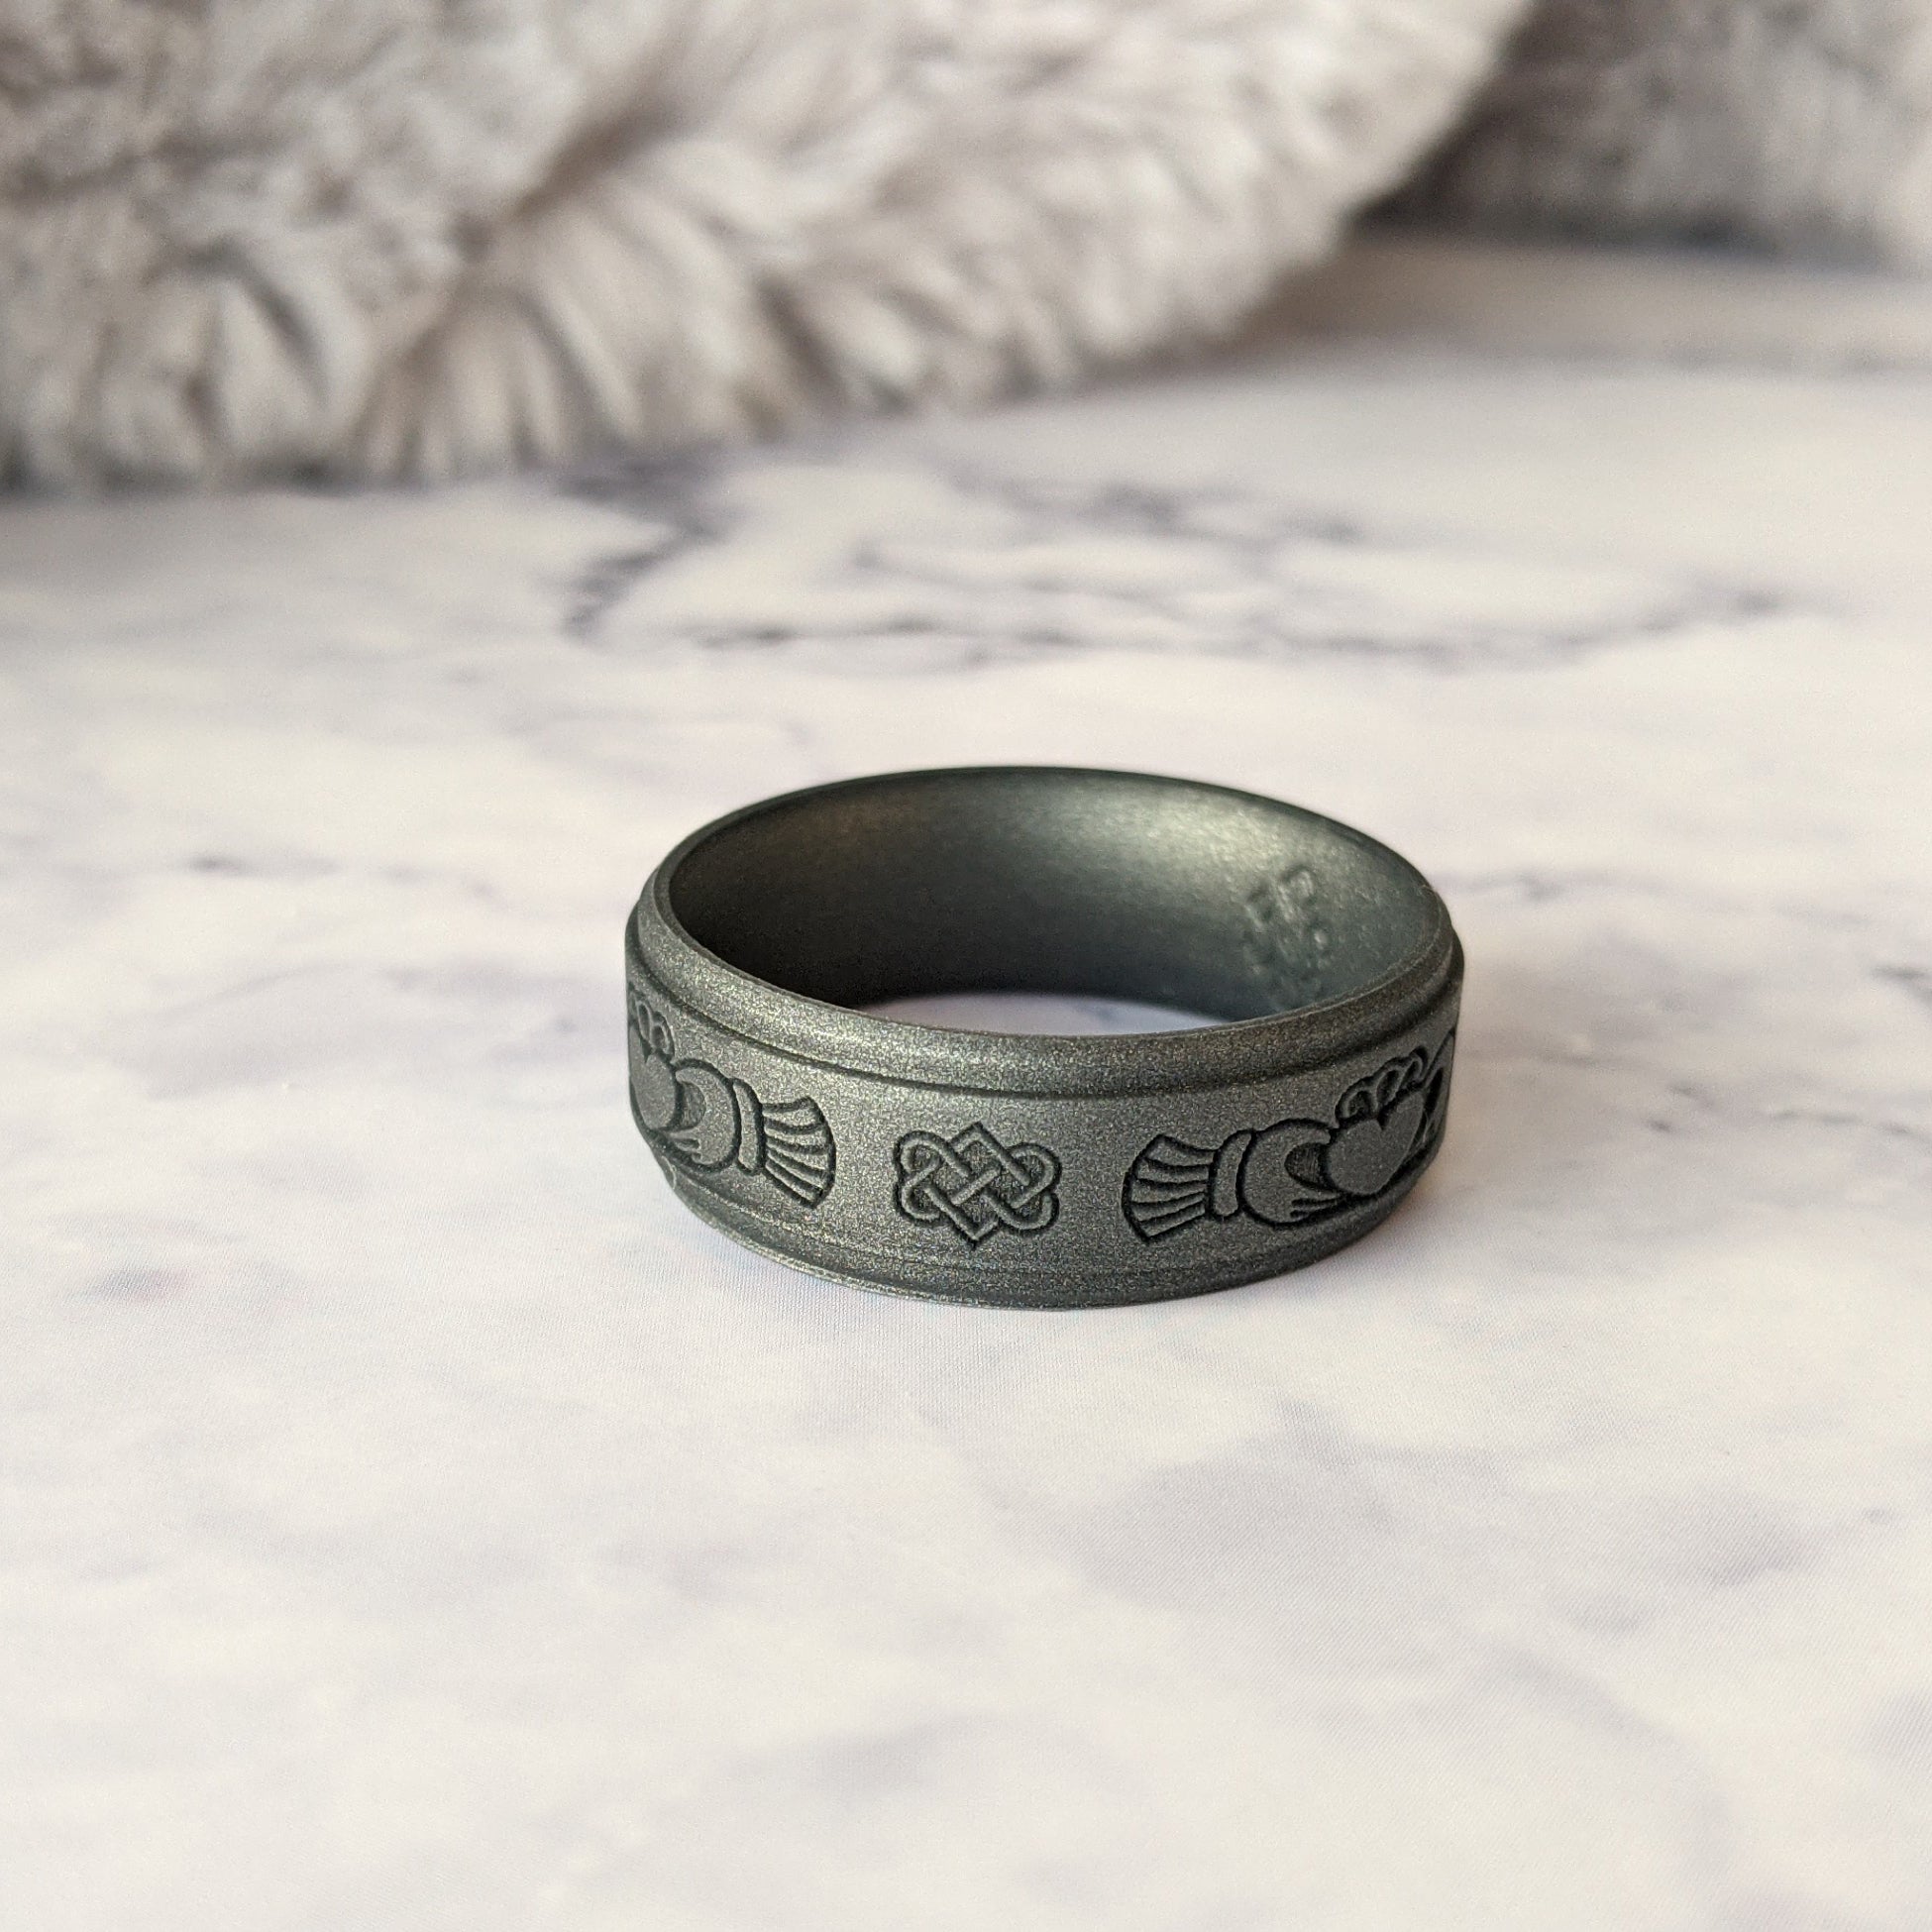 Pair of Silver and Black Hug Rings , Valentine Couple Ring